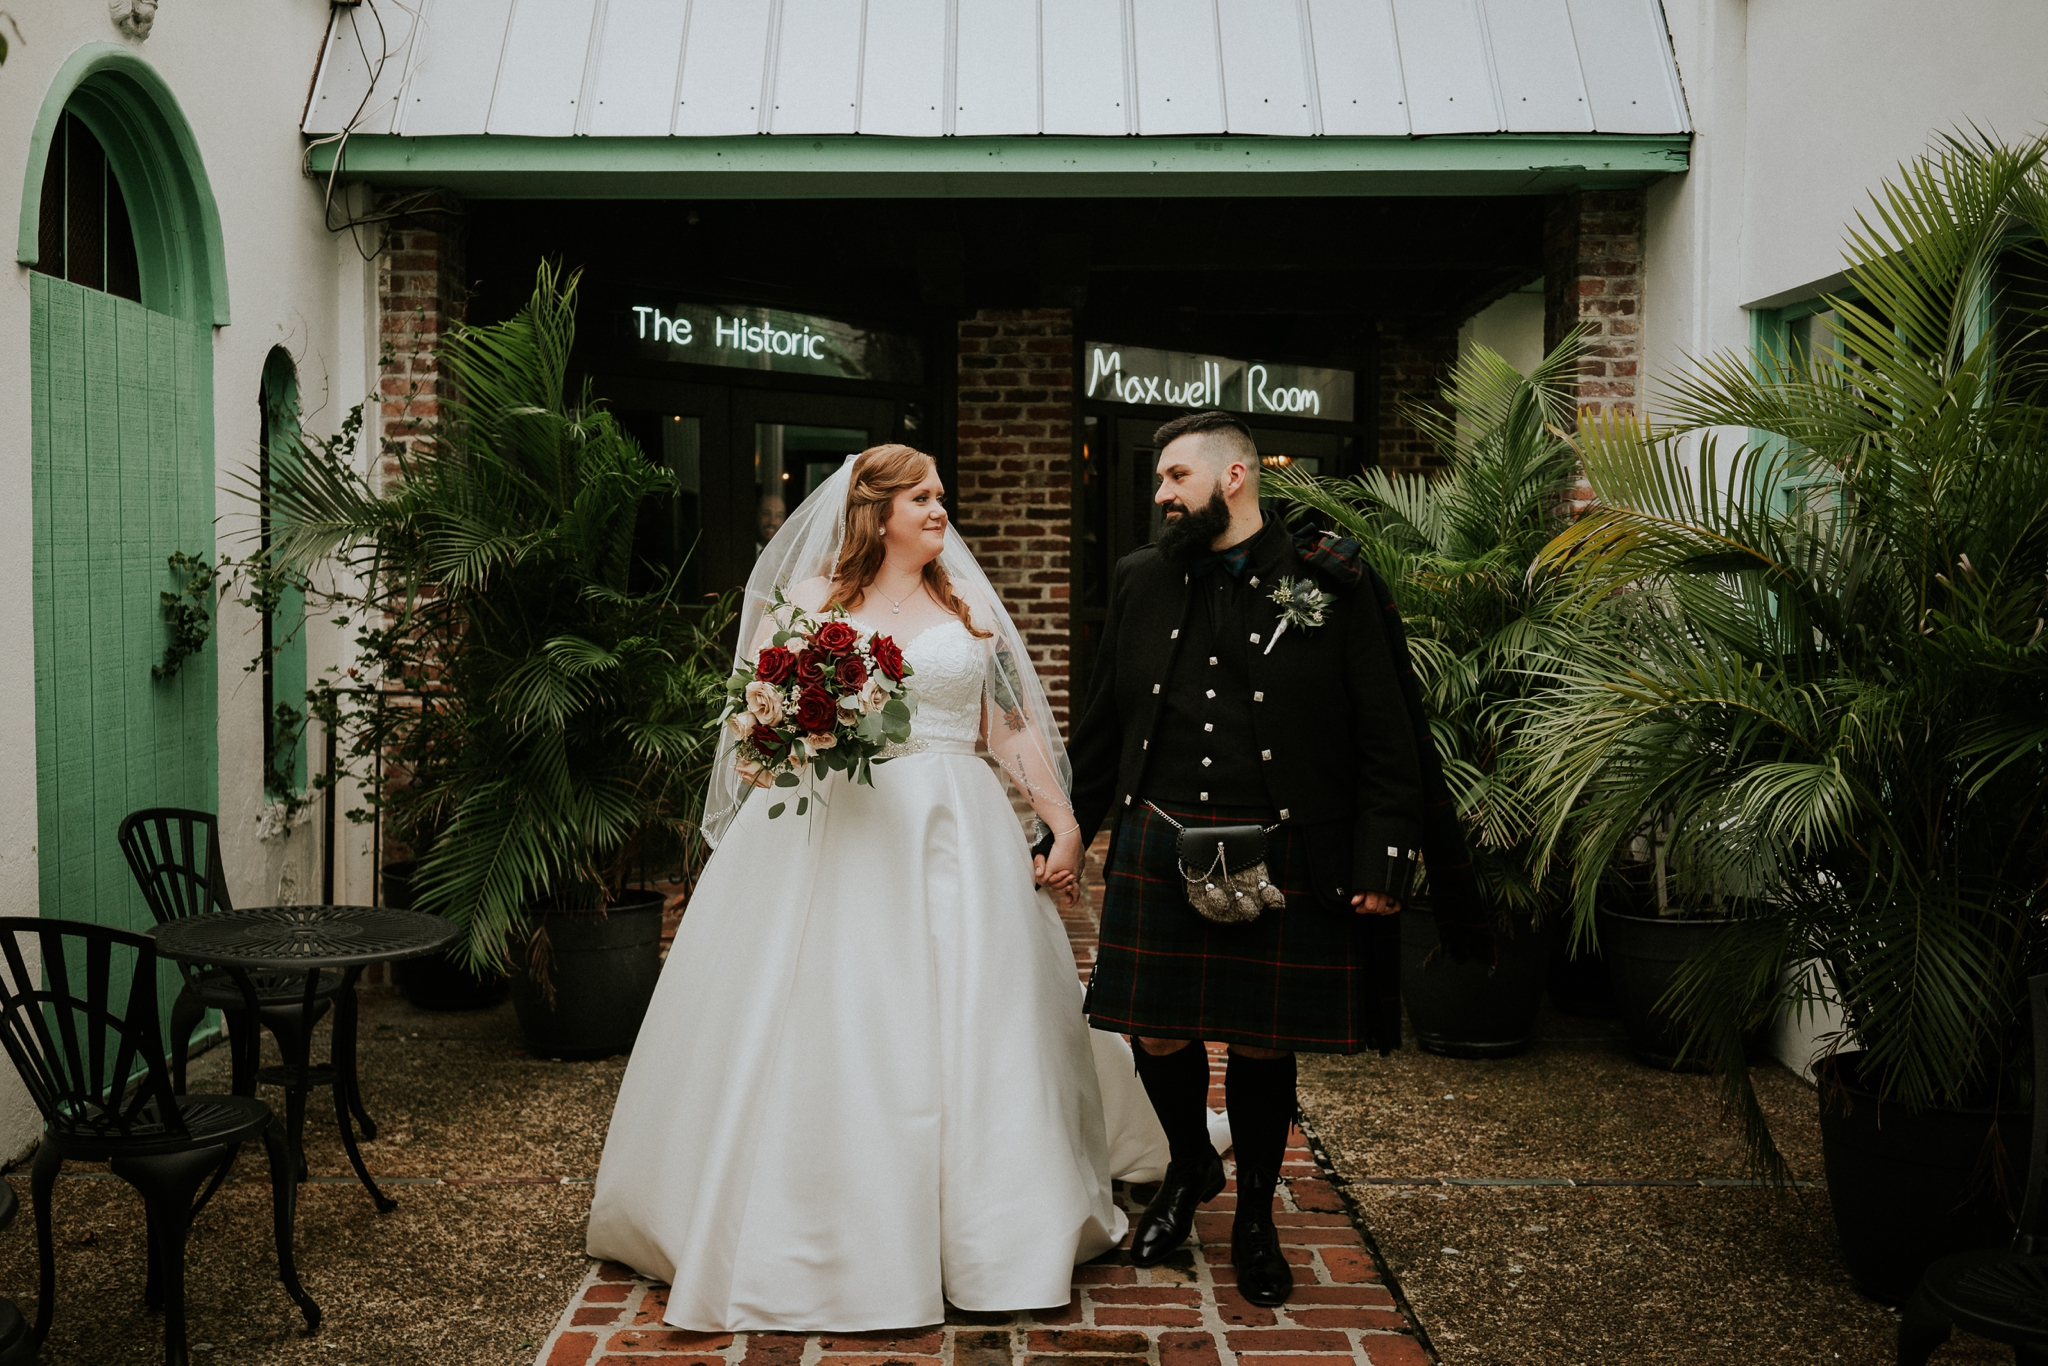 Fort Lauderdale newlyweds Allisha and Stan walk on brick path outside The Historic Maxwell Room courtyard with green neon sign lit above doors